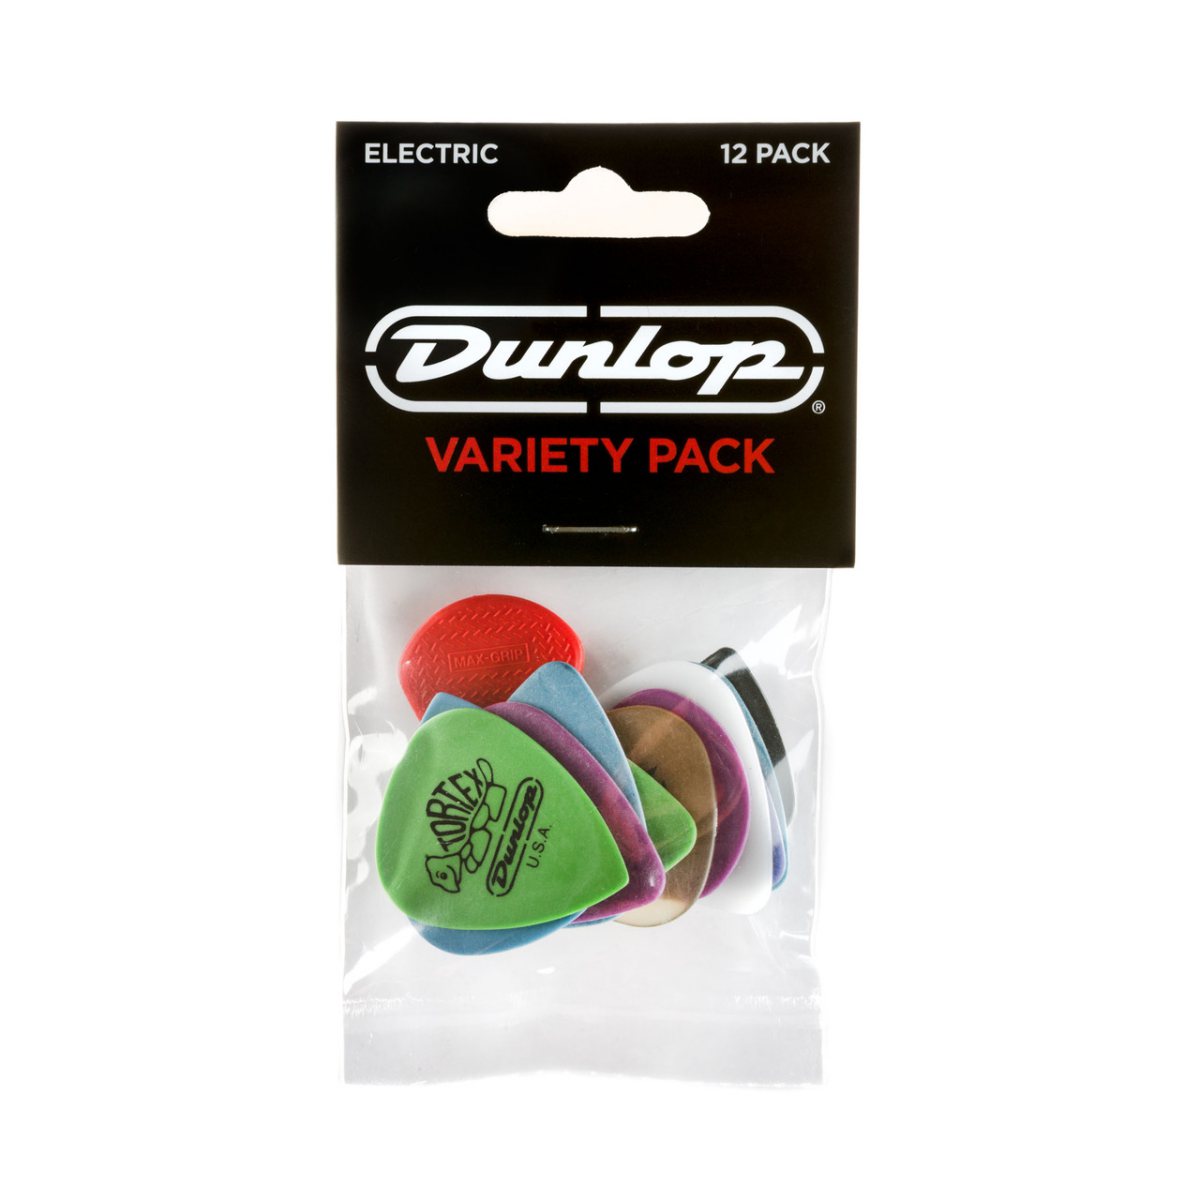 An image of Dunlop Variety Electric Player (12 Pack) - Gift for a Guitarist | PMT Online